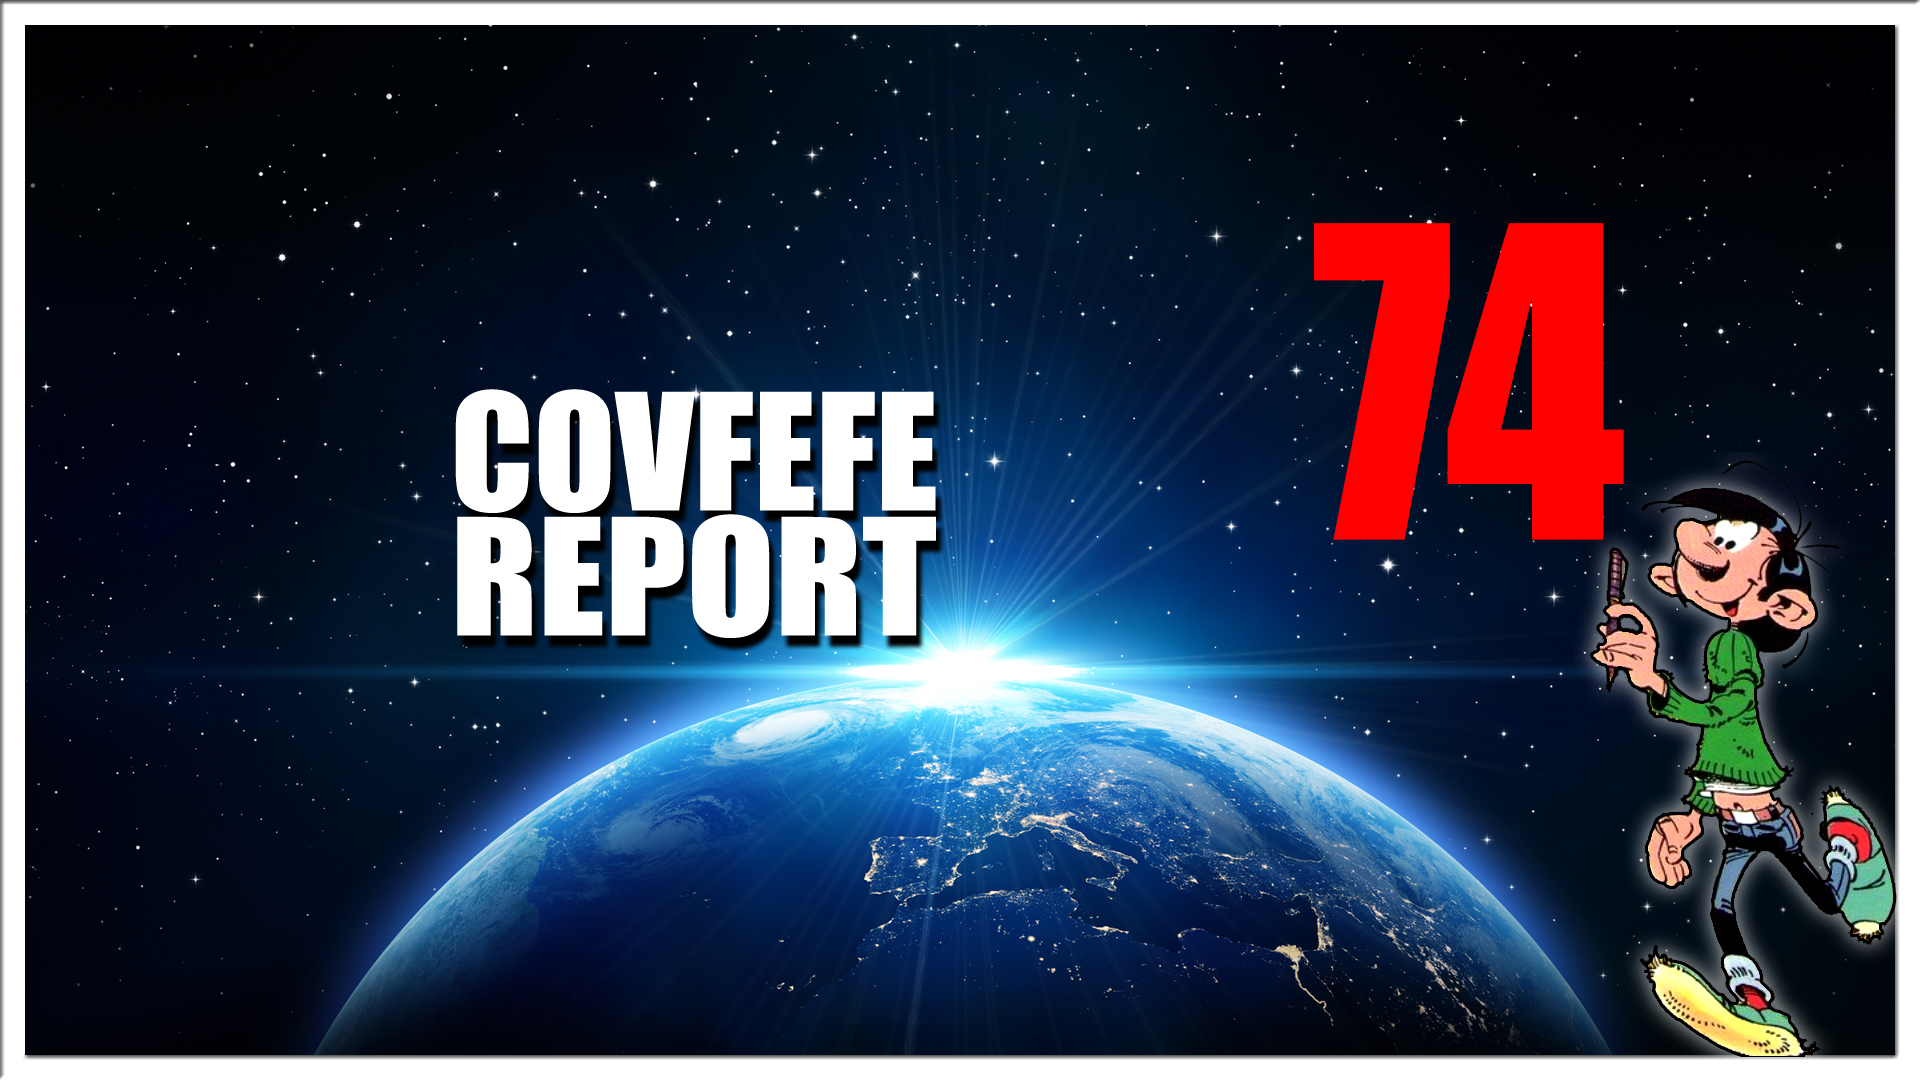 Covfefe Report 74. Goldenglobe2020 - Ricky Gervais, P_d_w_od